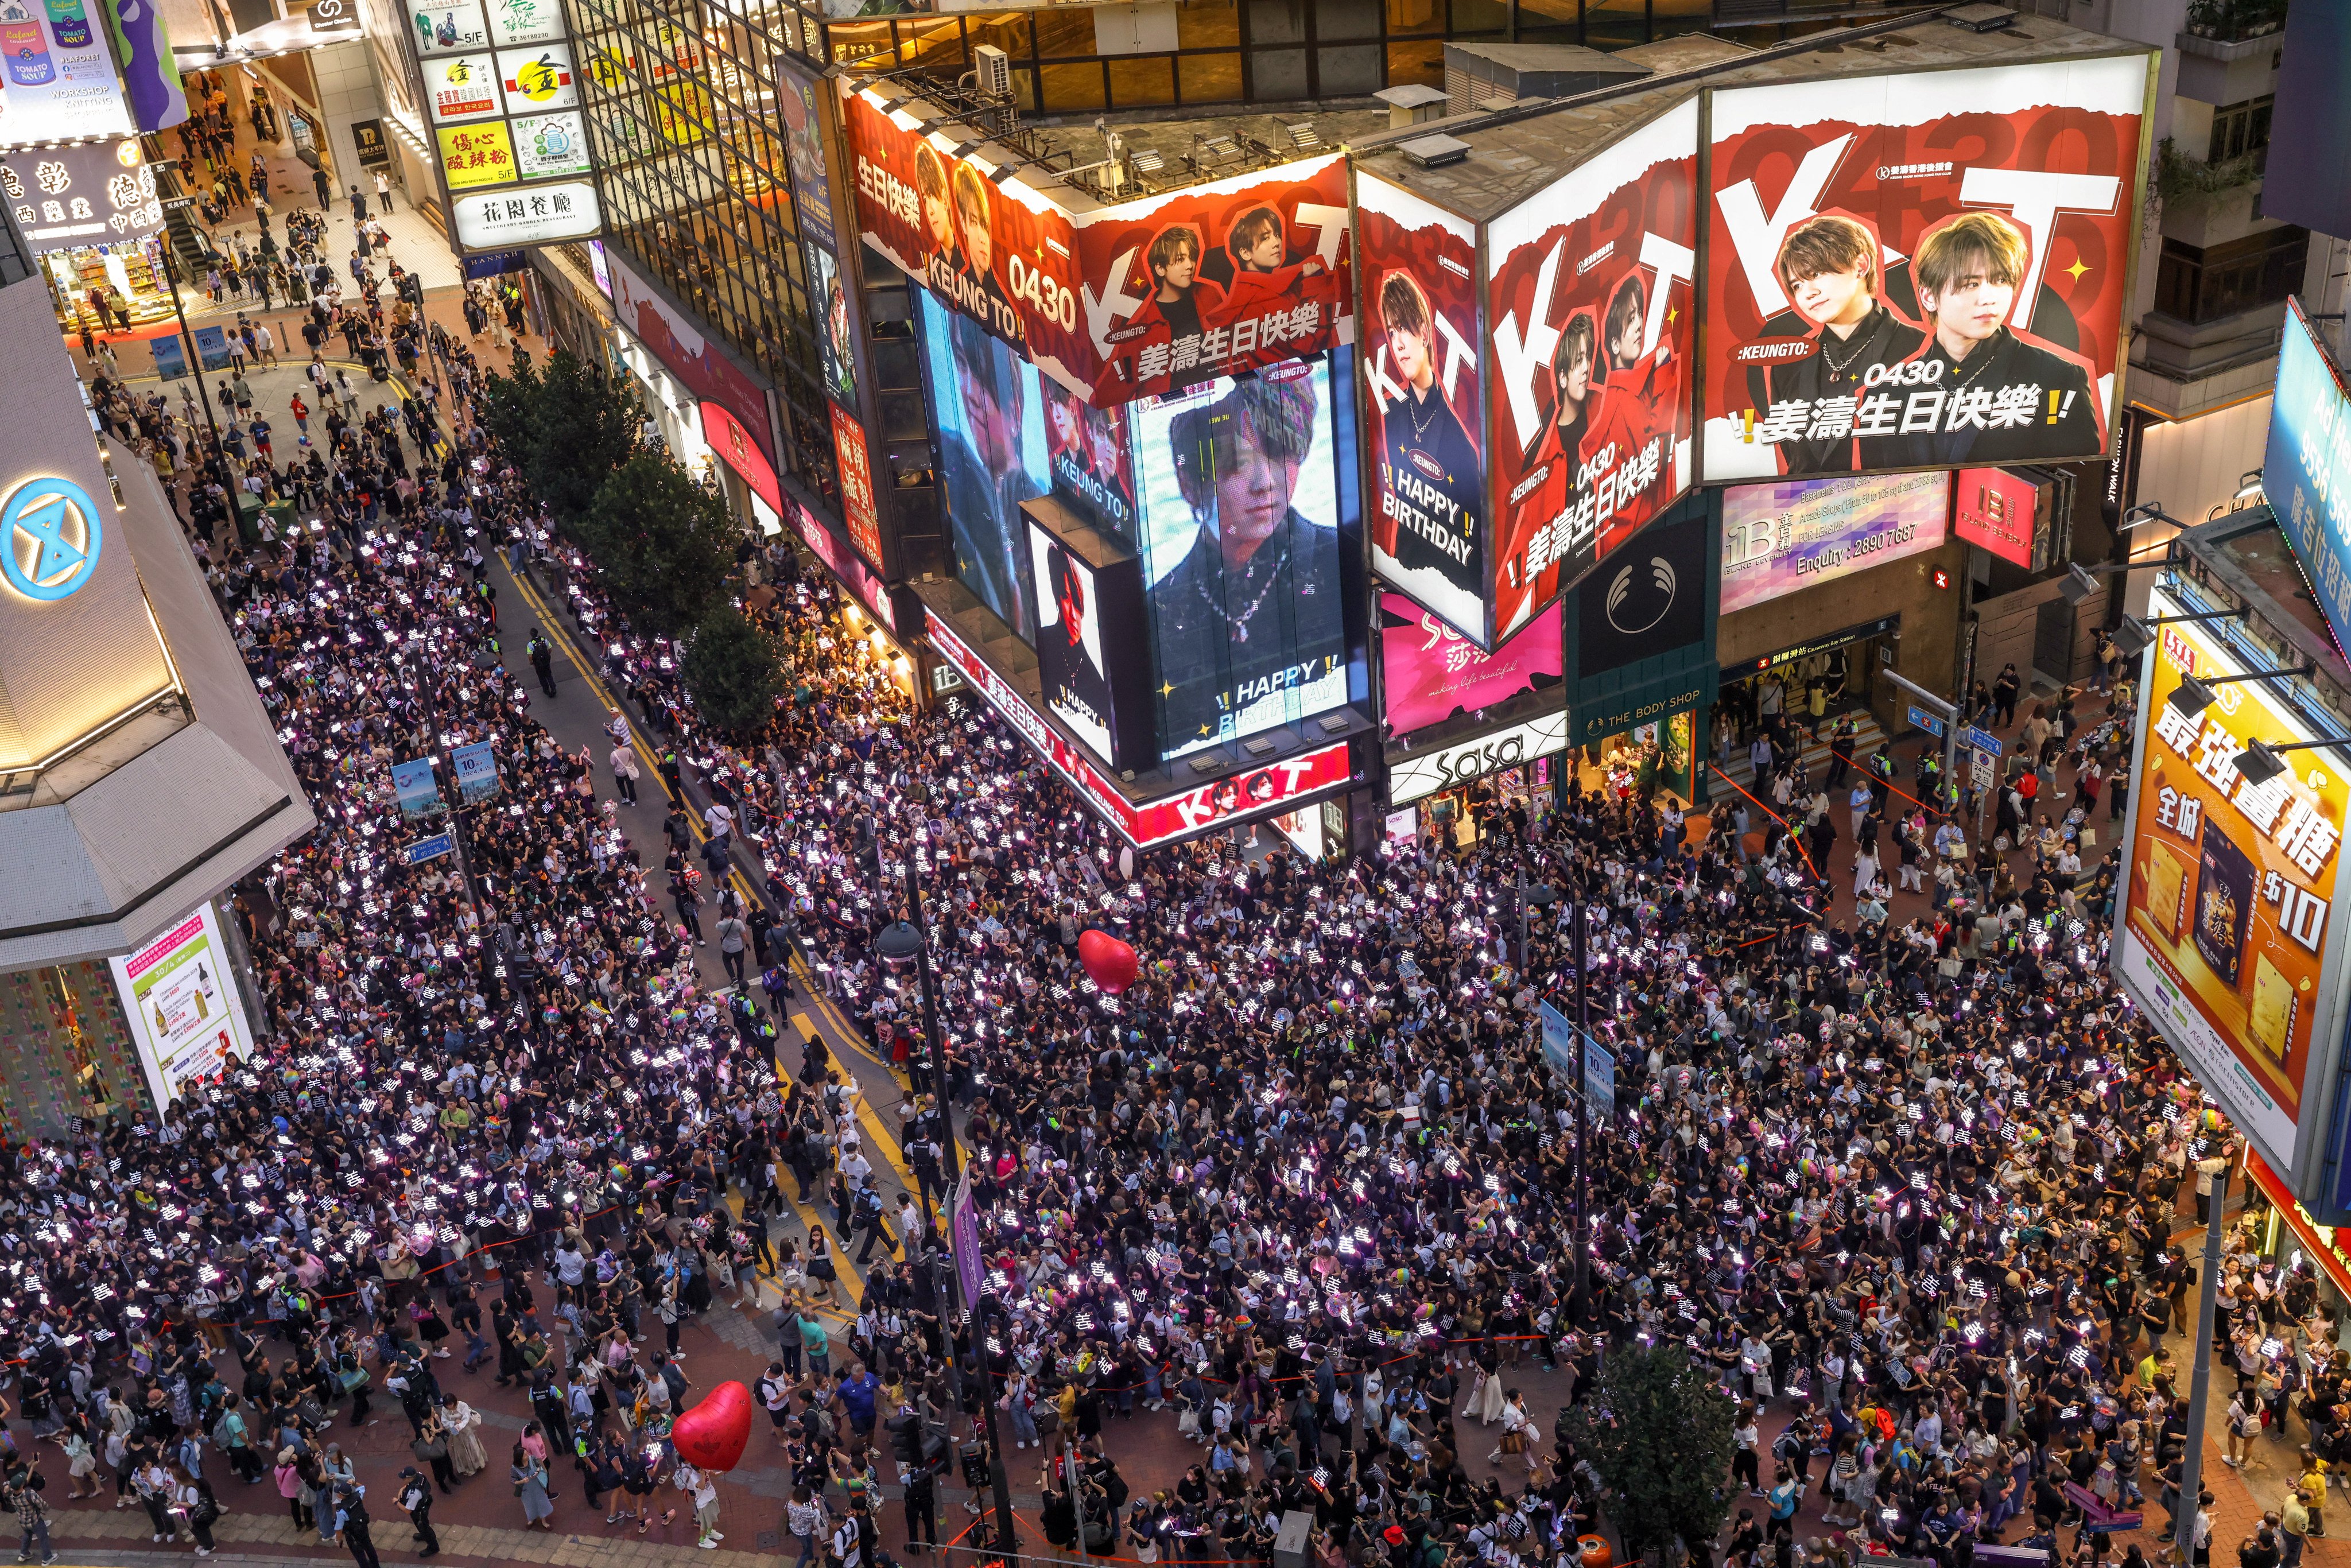 Scores of fans of the Mirror member pack Hennessy Road to celebrate Keung To’s birthday. Photo: Yik Yeung-man